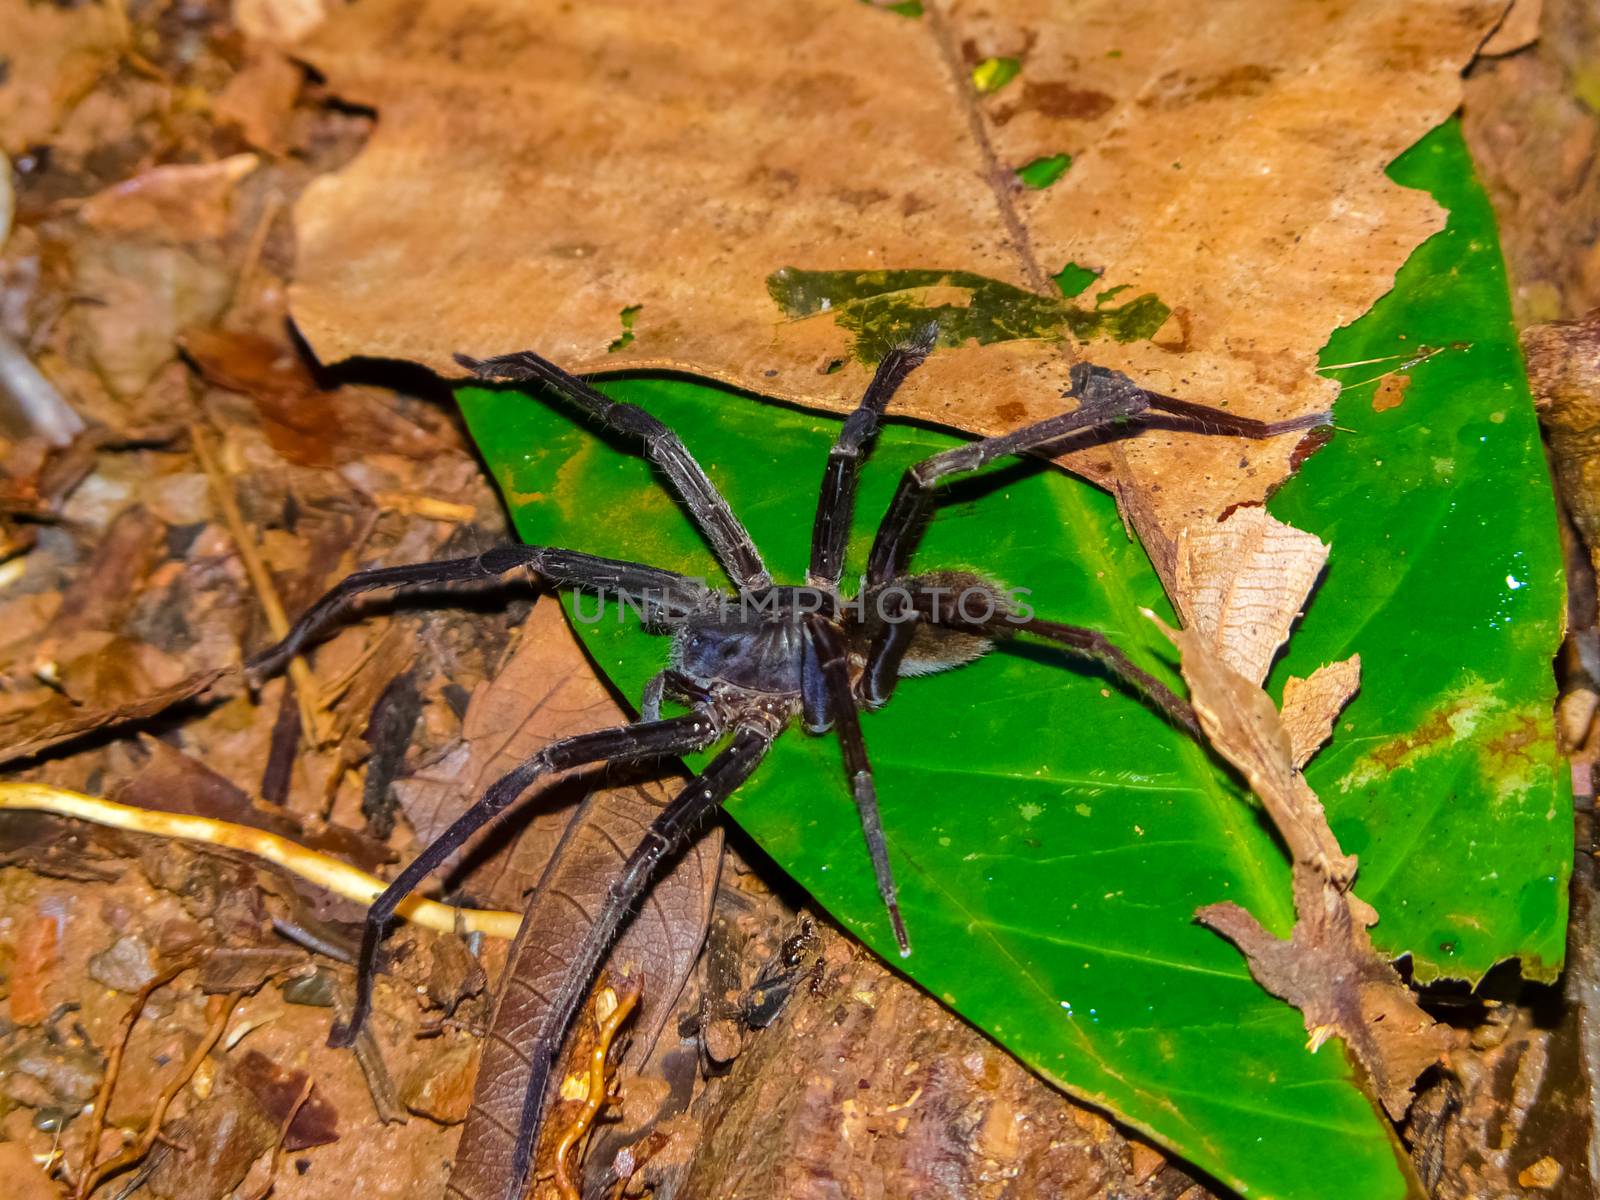 Spider, Corcovado National Park by nicousnake